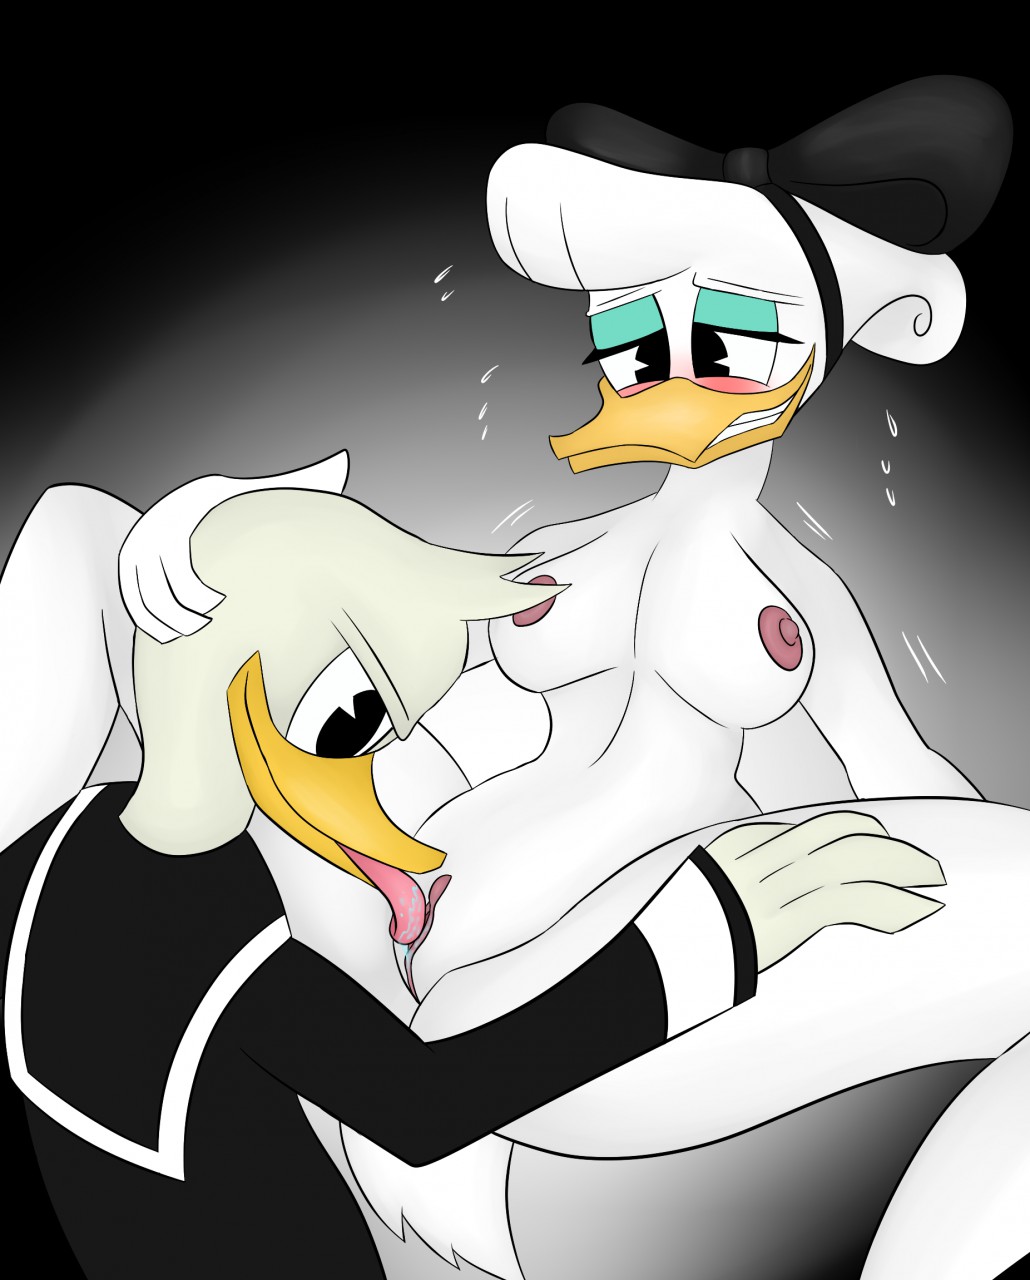 relevance. daisy duck porno sorted by. 